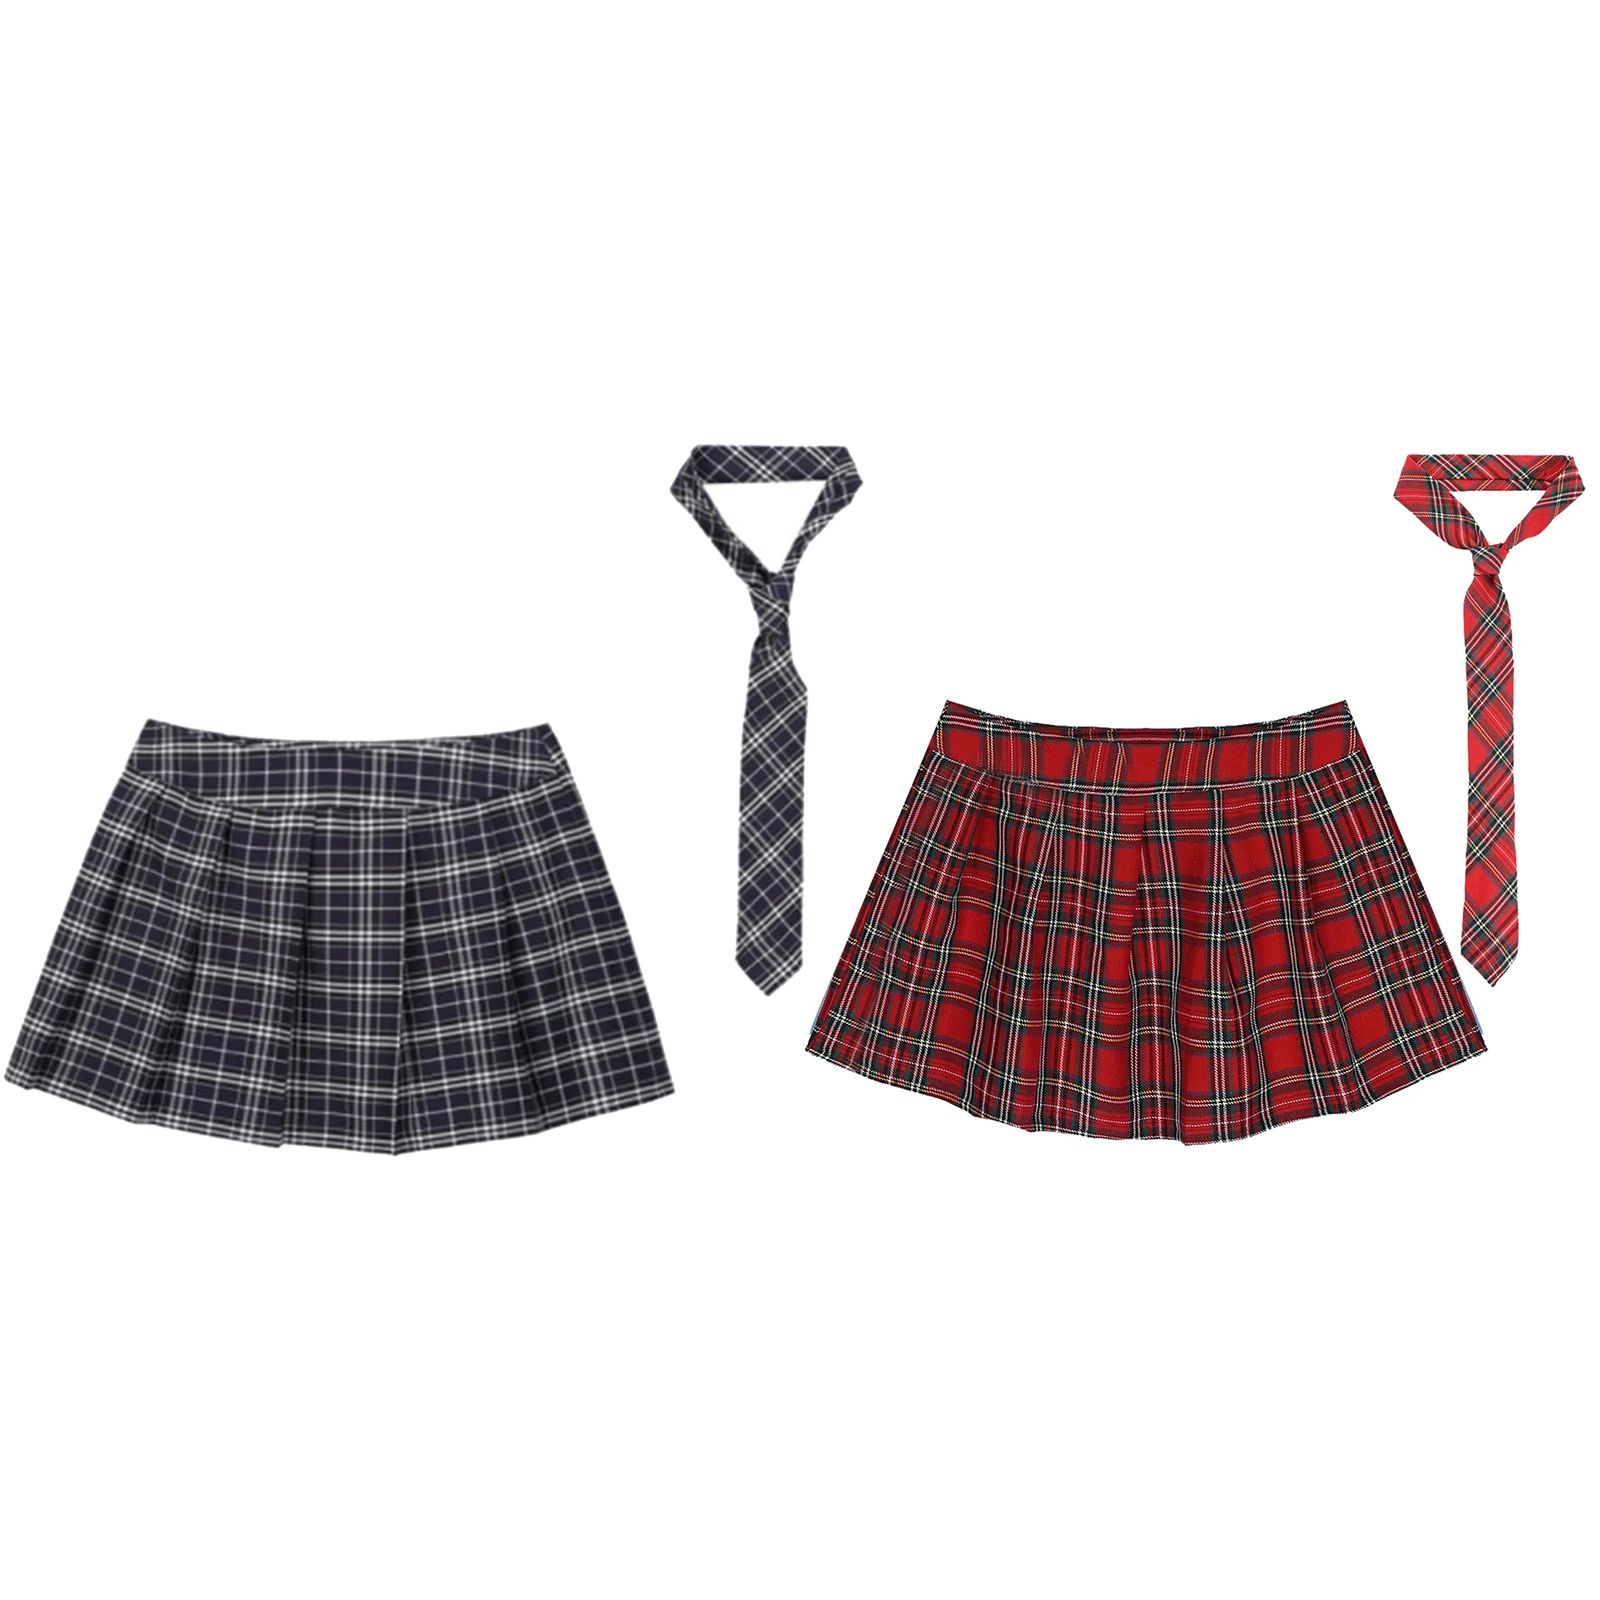 

Women Schoolgirls Role Play Costume Fancy Dress Ball Outfit Zipper Plaid Pleated Mini Skirt with Necktie Suitable for Cosplay